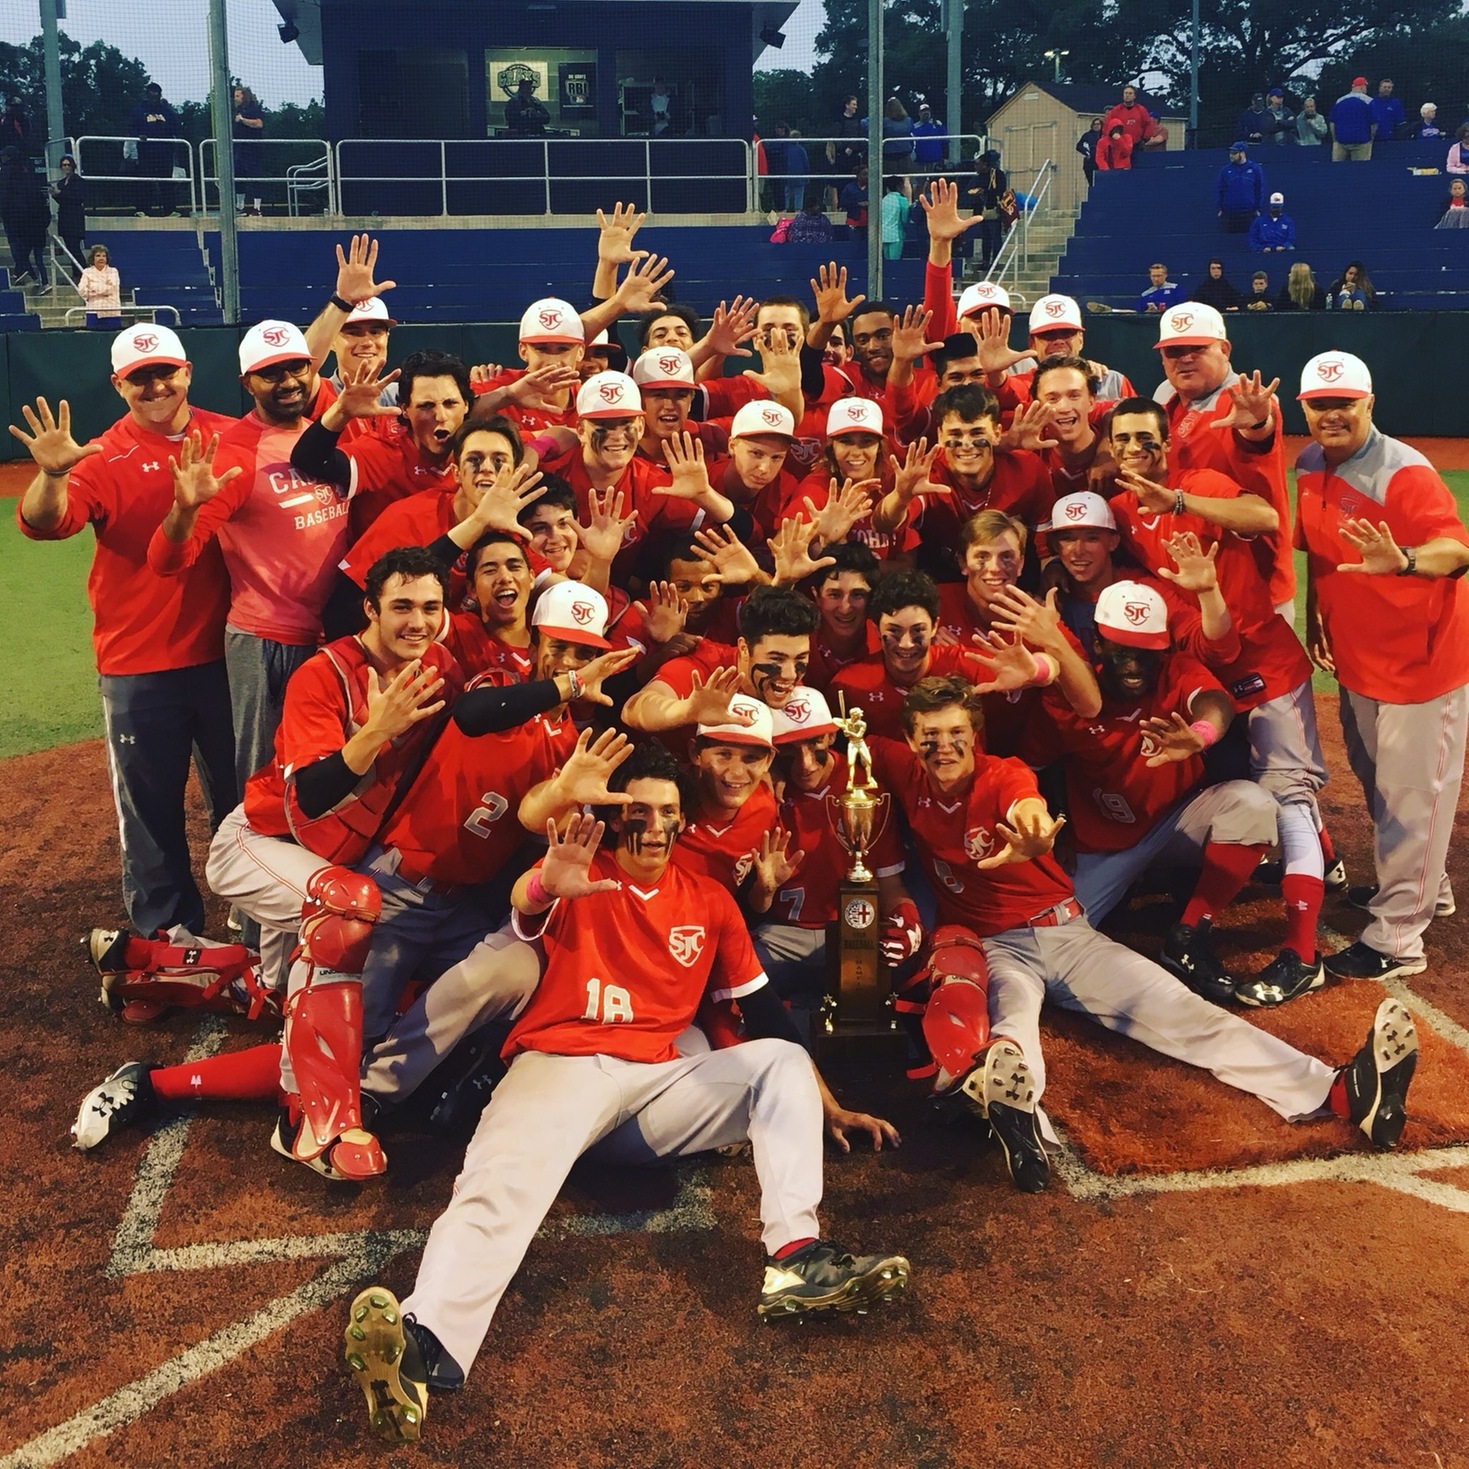 Michael Campbell’s walk-off home run gives St. John’s WCAC baseball title in 12-inning epic vs. DeMatha